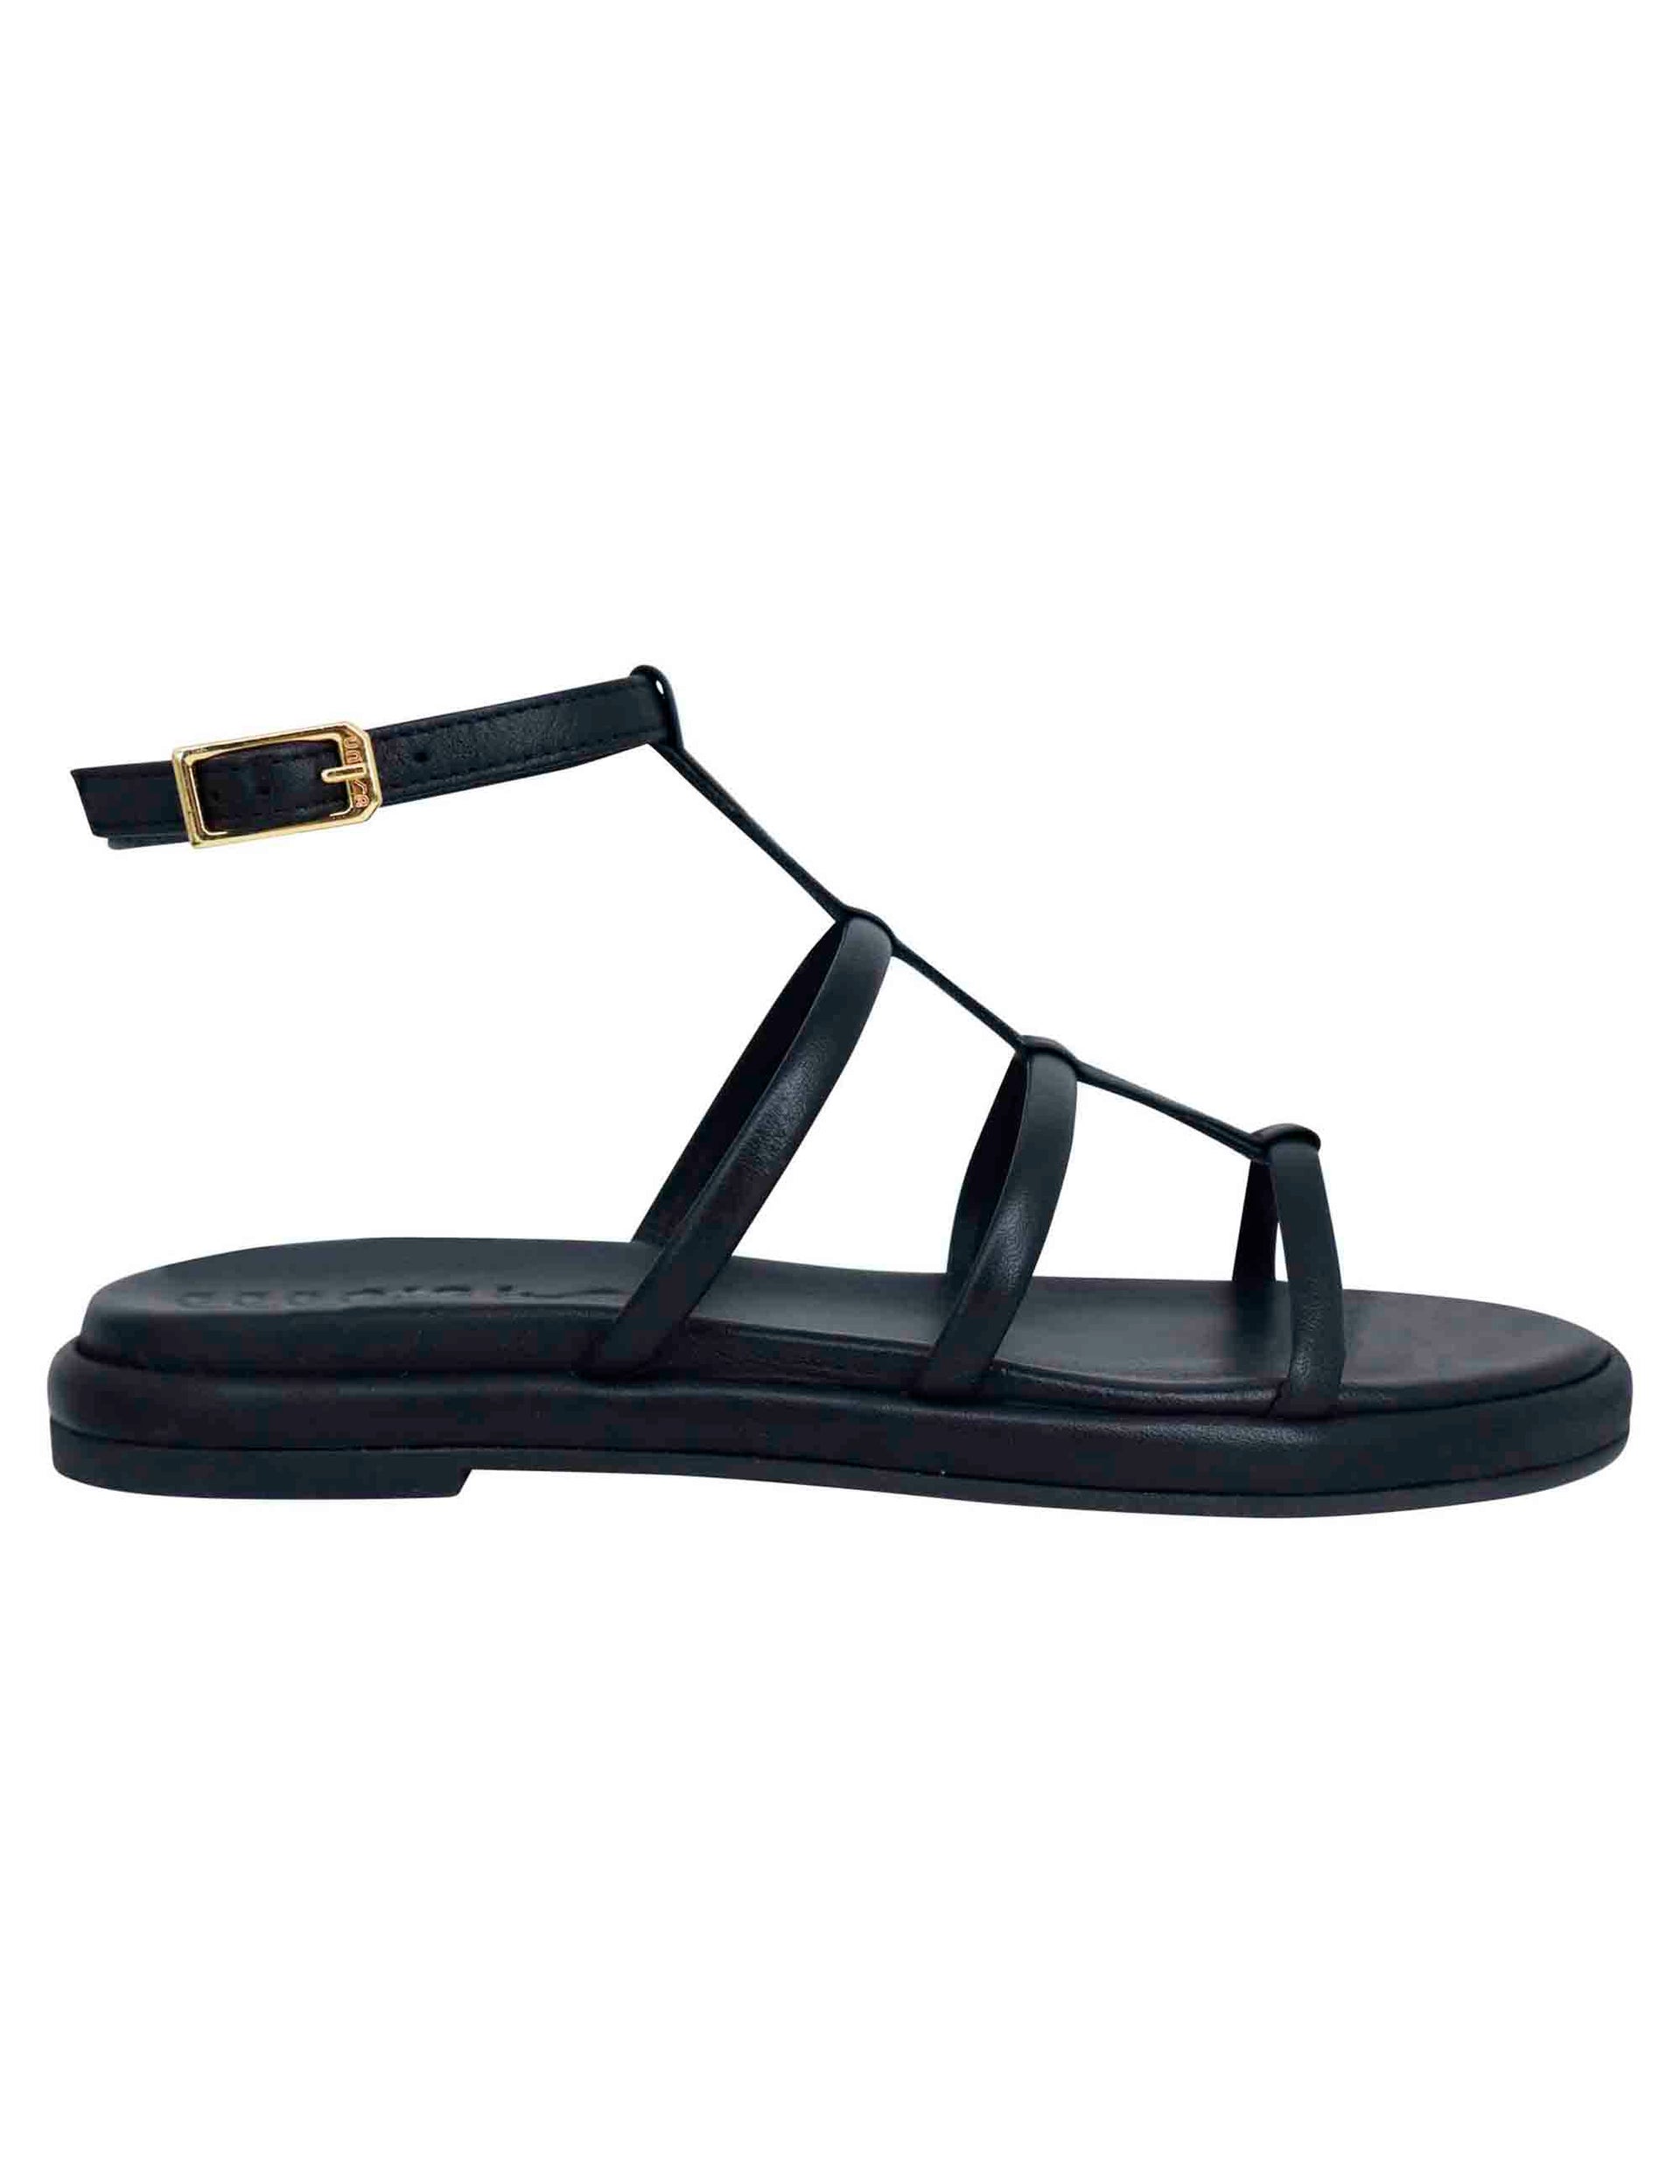 Women's flat sandals in black leather with ankle strap